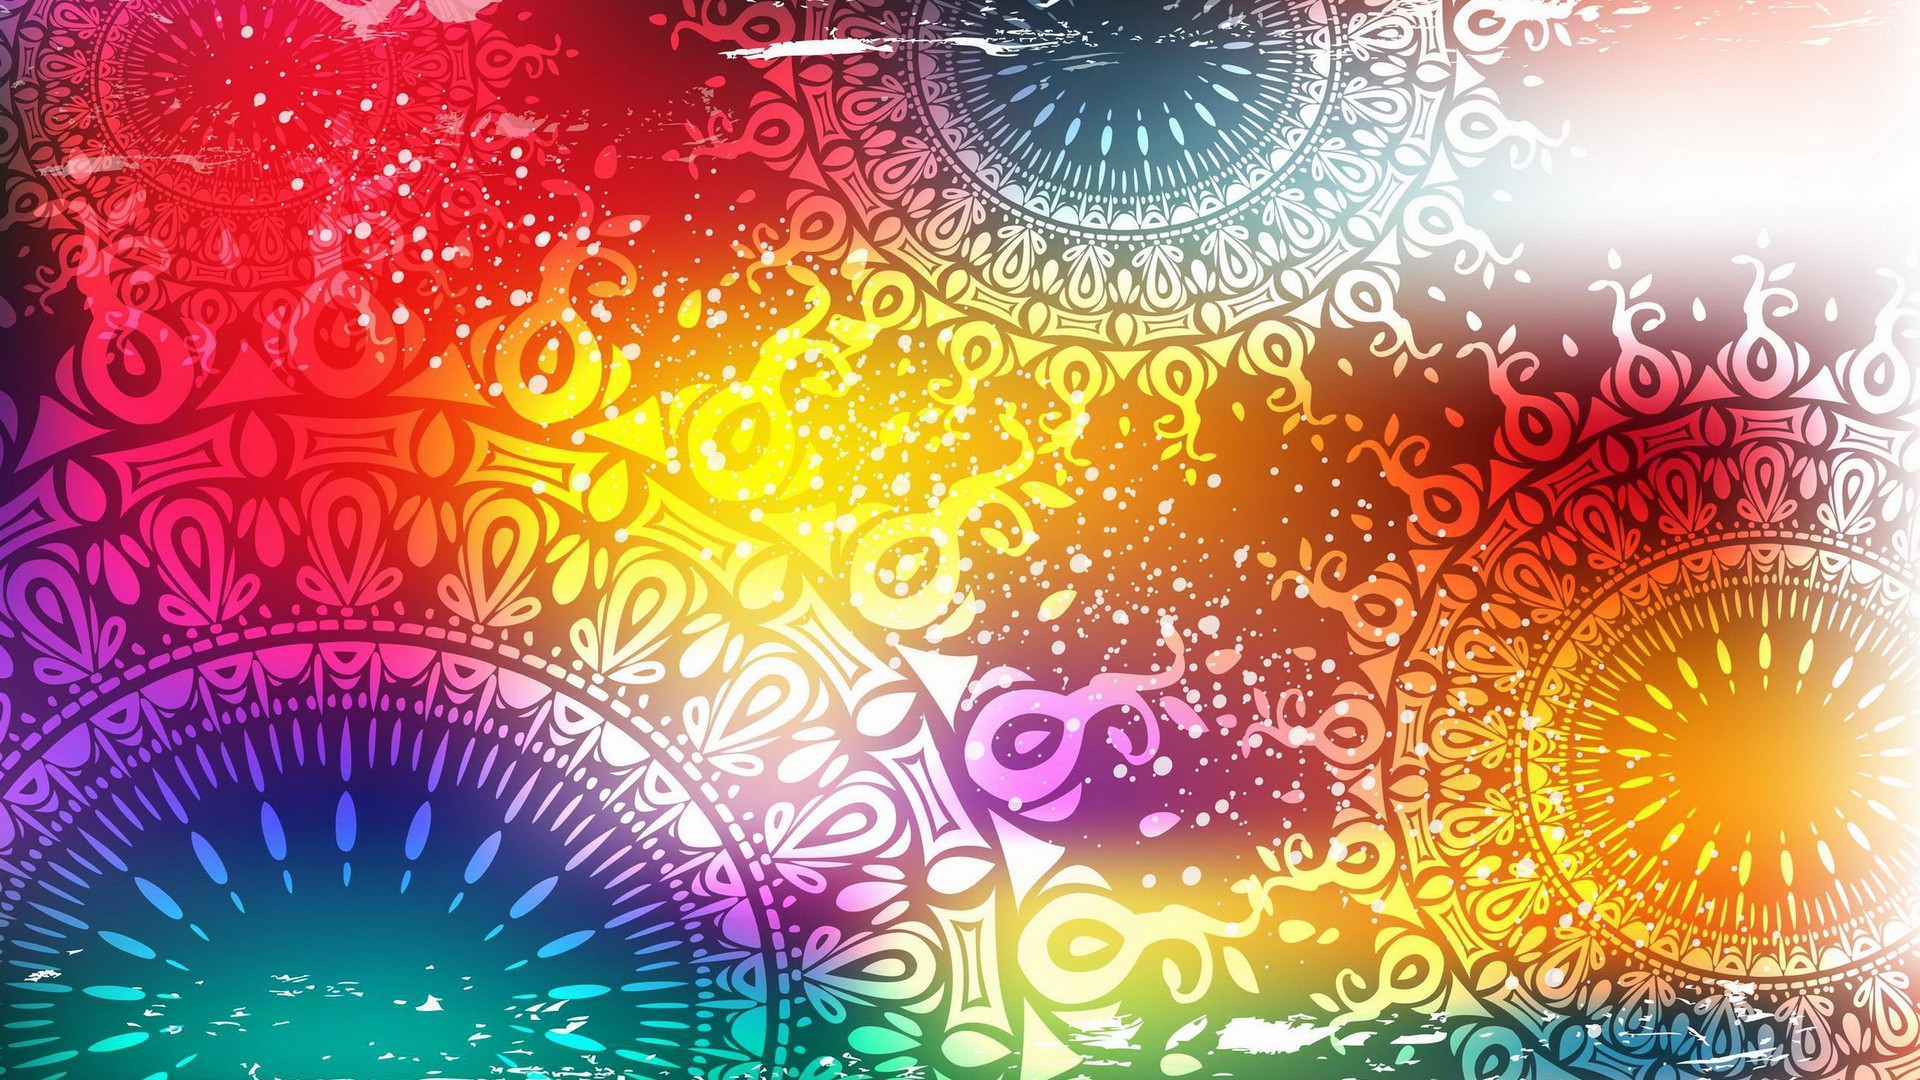 Psychedelic Desktop Backgrounds HD Resolution 1920x1080